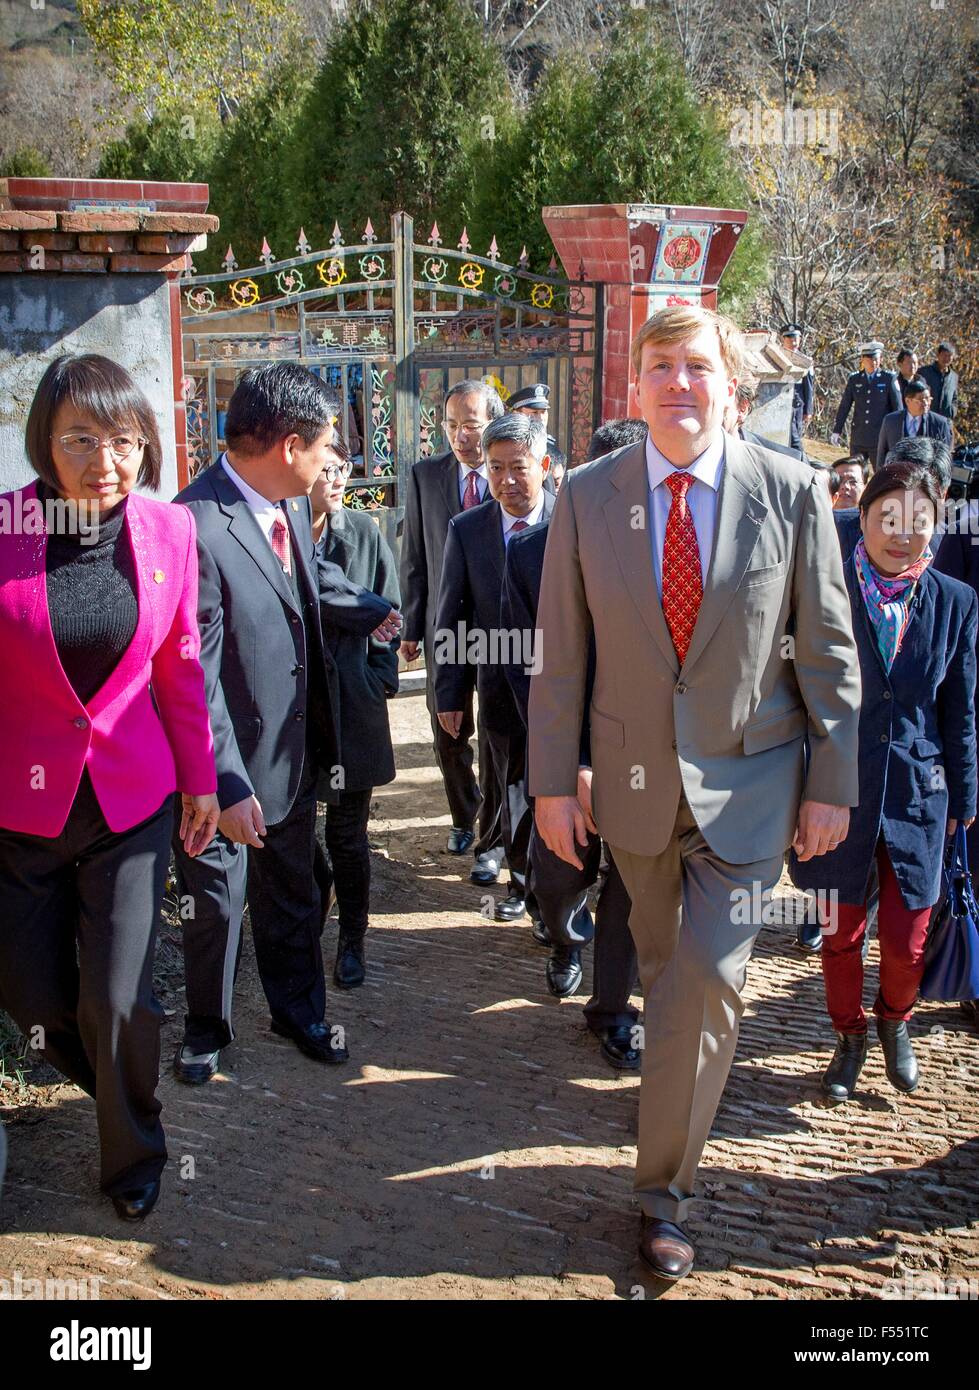 King Willem-Alexander of The Netherlands visit the village of Yanhewanzhen in China, 27 October 2015. They visit an apple farm and get explanation about Loss Plateau by Luo Guobin director of the institute of Climate and Water Protection. Loss Plateau is an restored area and with new eco systems. The King and Queen are in china for an 5 day state visit. Photo: Patrick van Katwijk/ POINT DE VUE OUT - NO WIRE SERVICE - Stock Photo